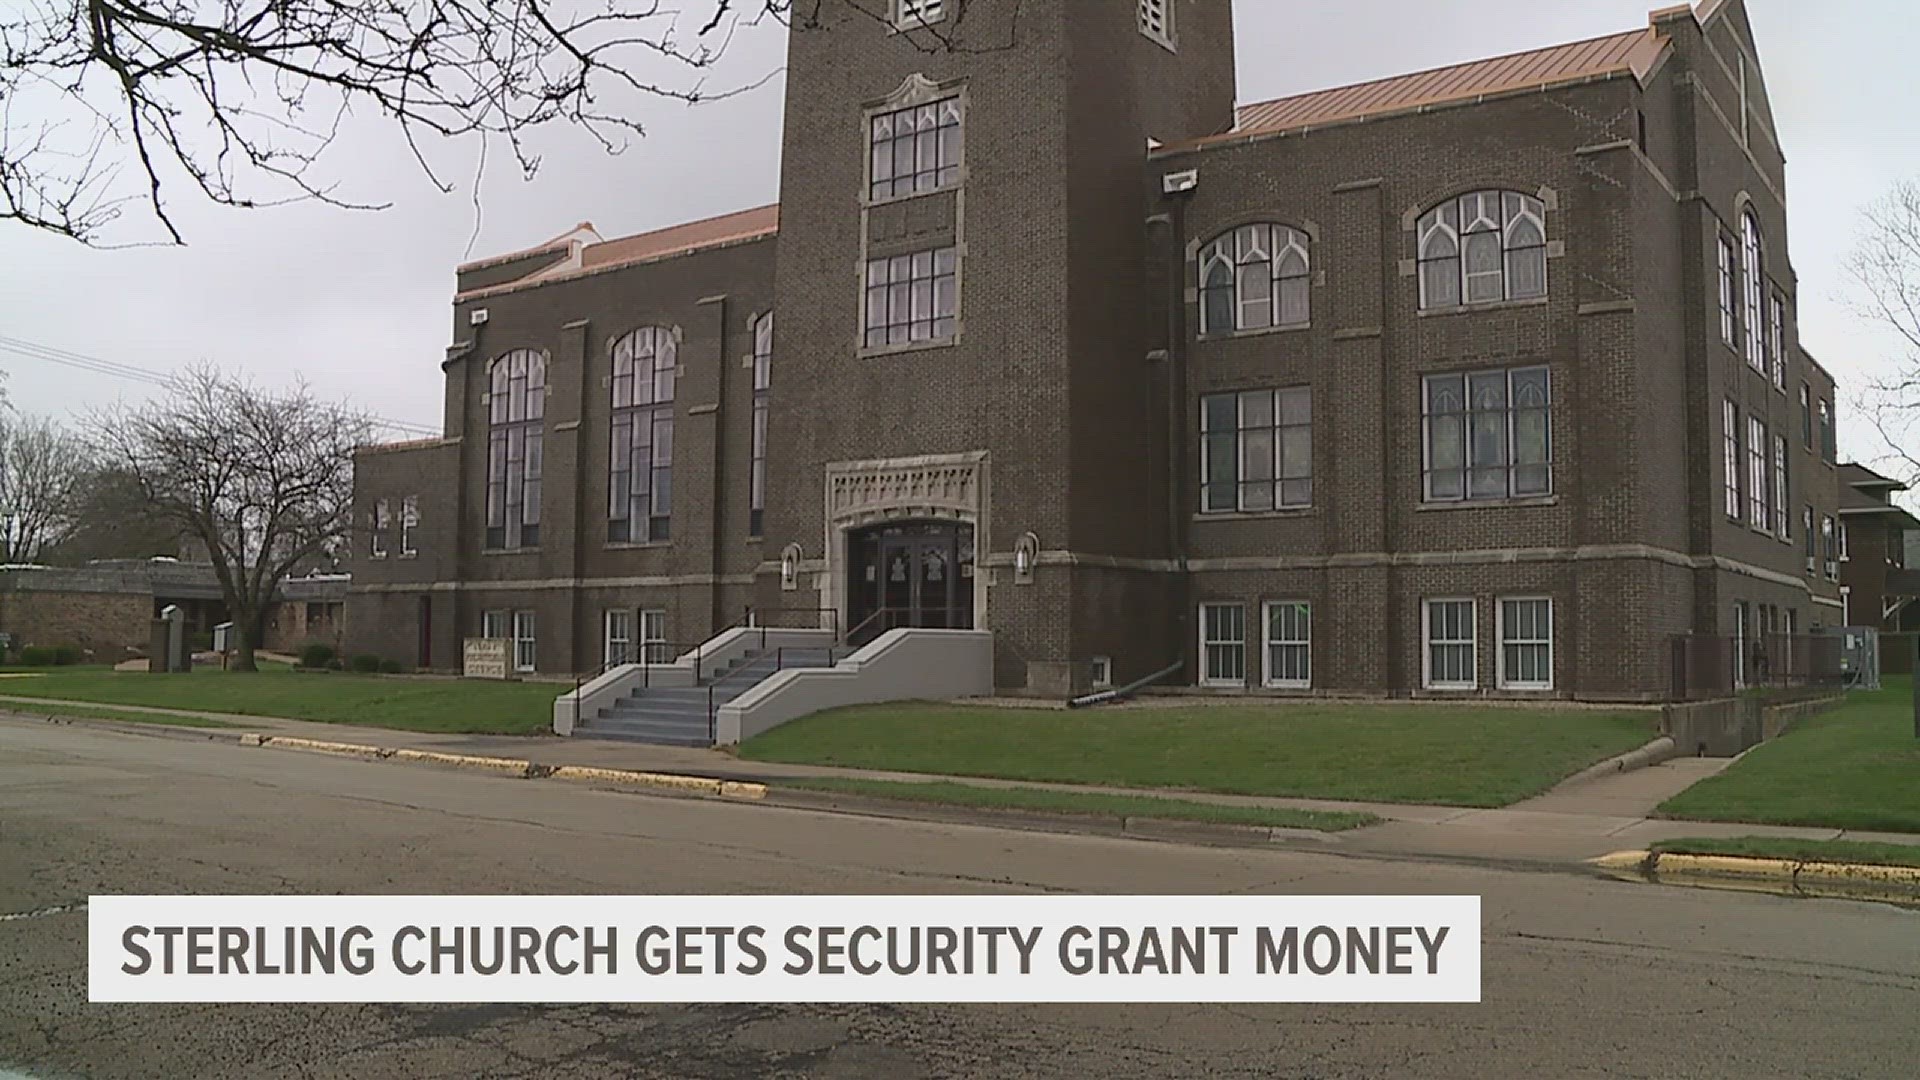 Illinois Governor J.B. Pritzker awarded 116 non-profit organizations across the state, money for security upgrades. Churches in Sterling and Galesburg are recipients